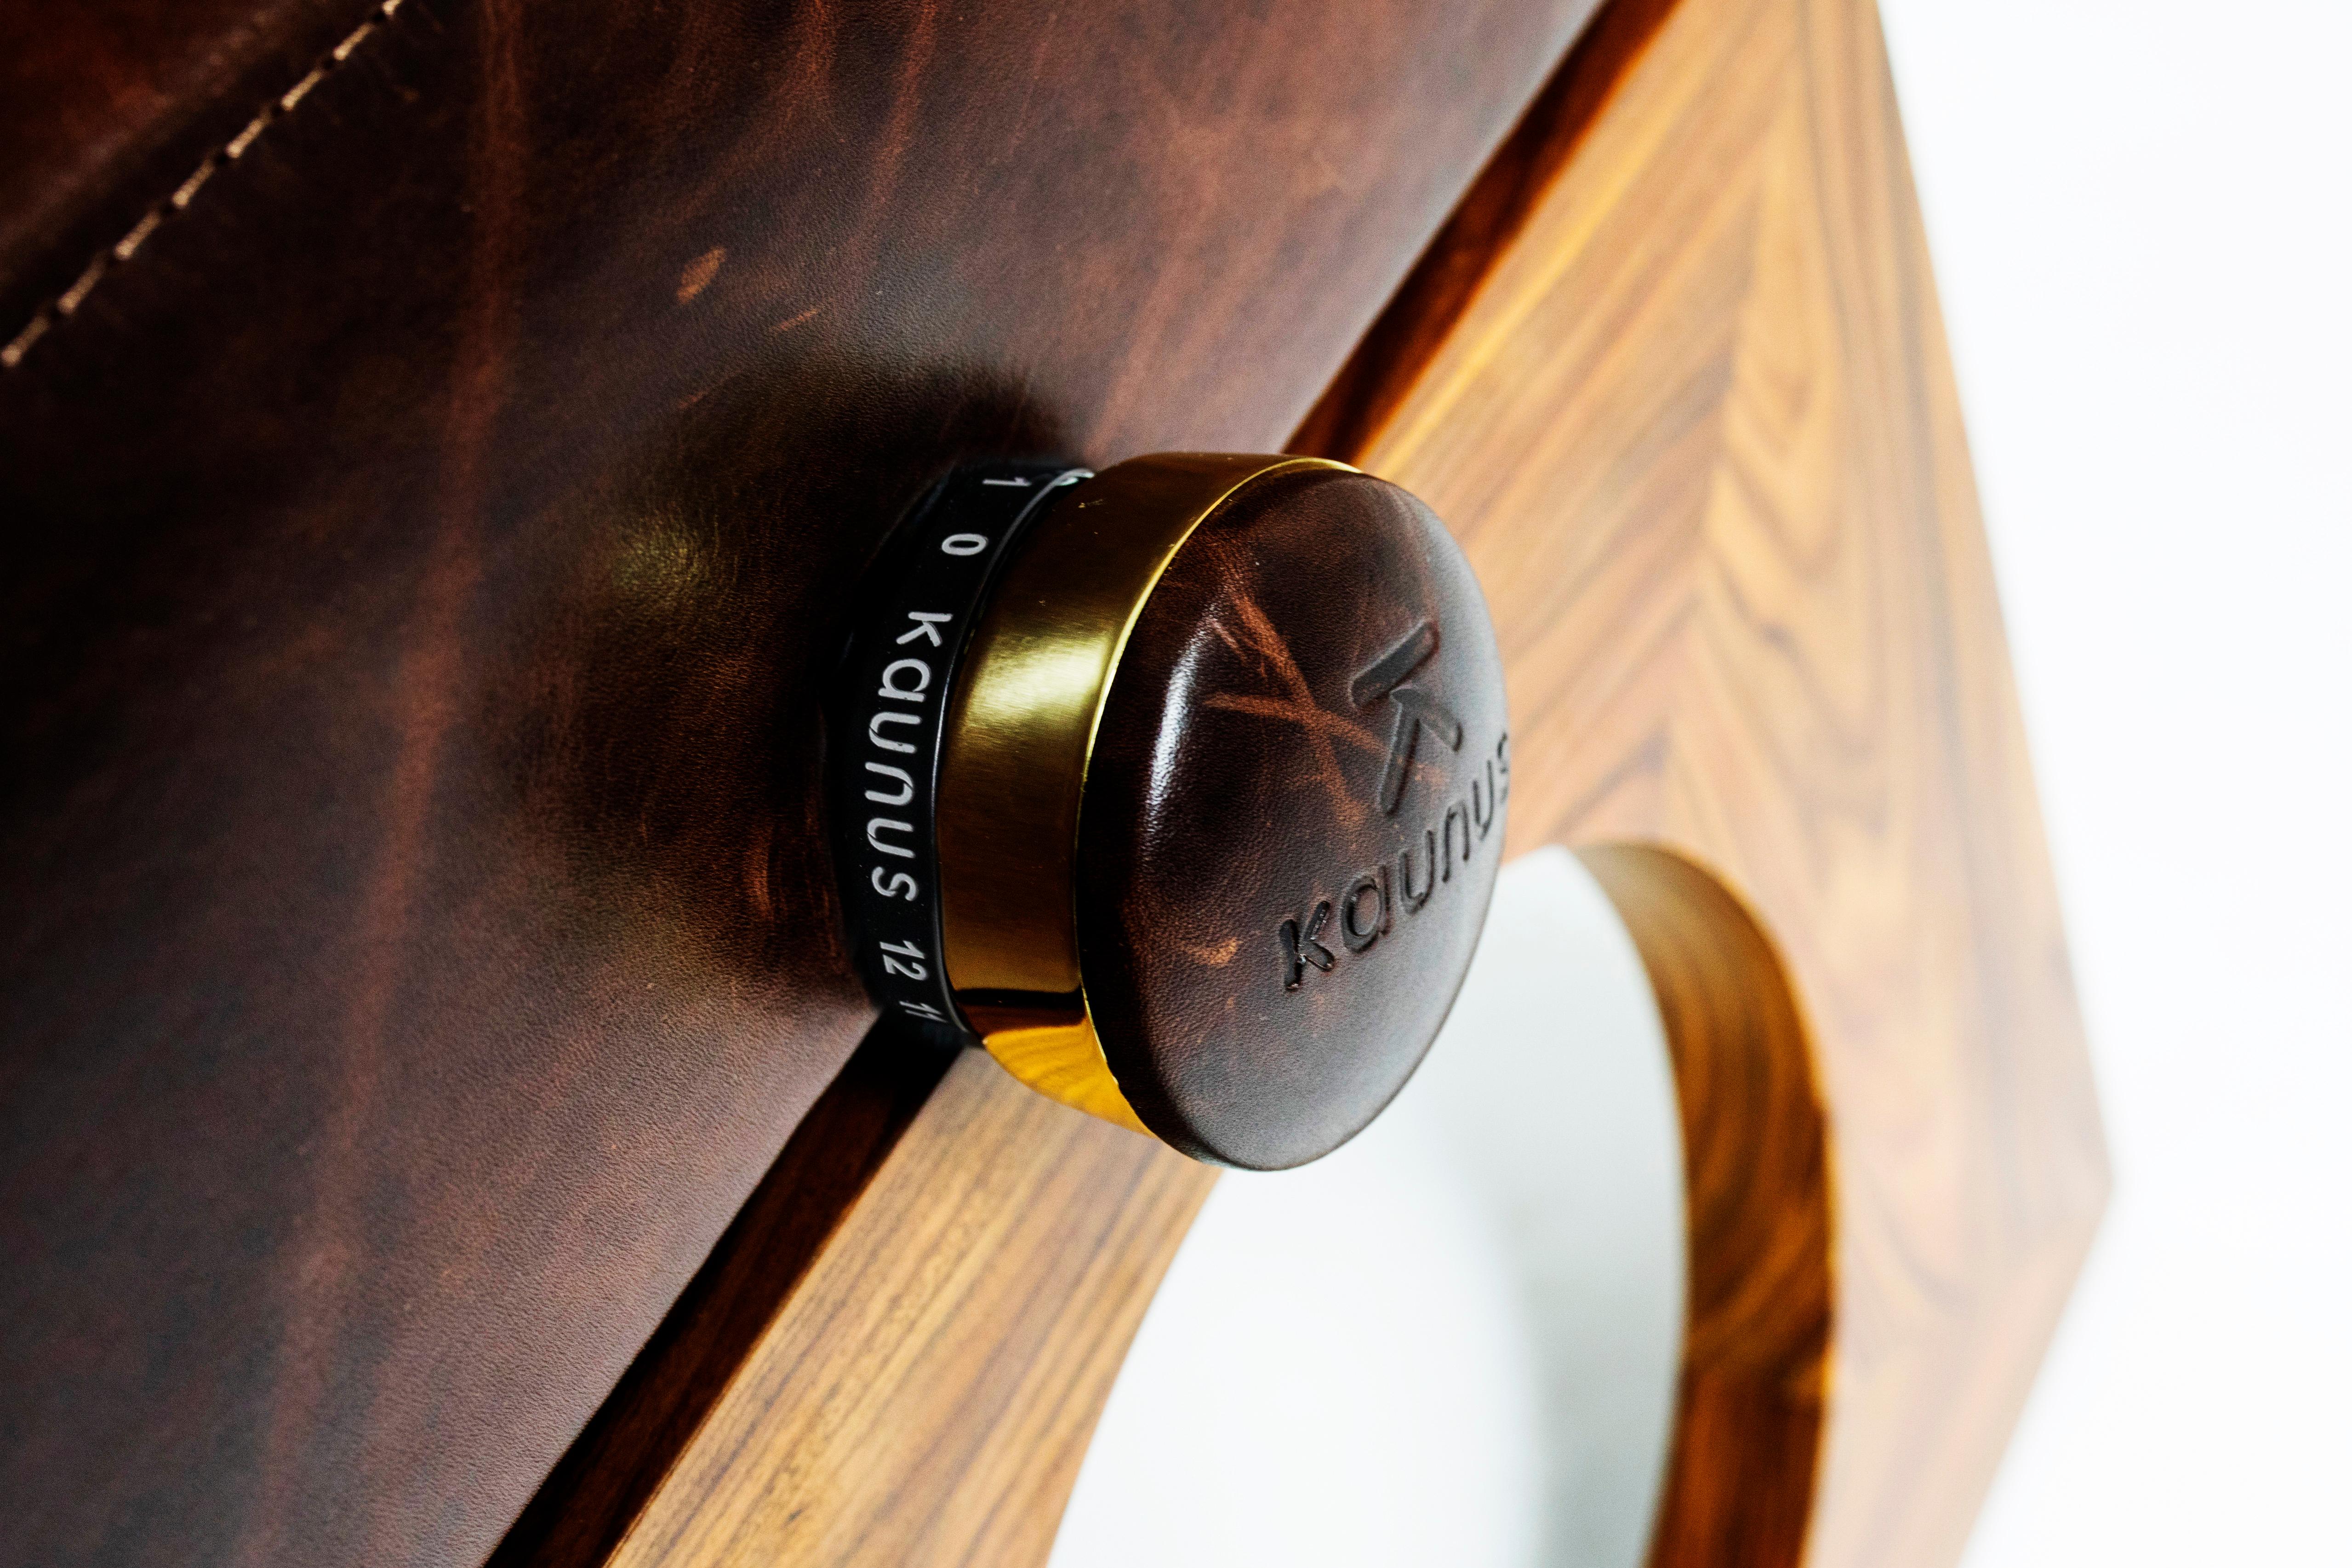 Each Mitsuko Piano Bench is unique and unrepeatable due to the texture, grain and natural coloring of the rosewood.

Personalization: Your Kaunus Piano Bench can be personalized by engraving a message, a name or date on the knobs, an exclusive